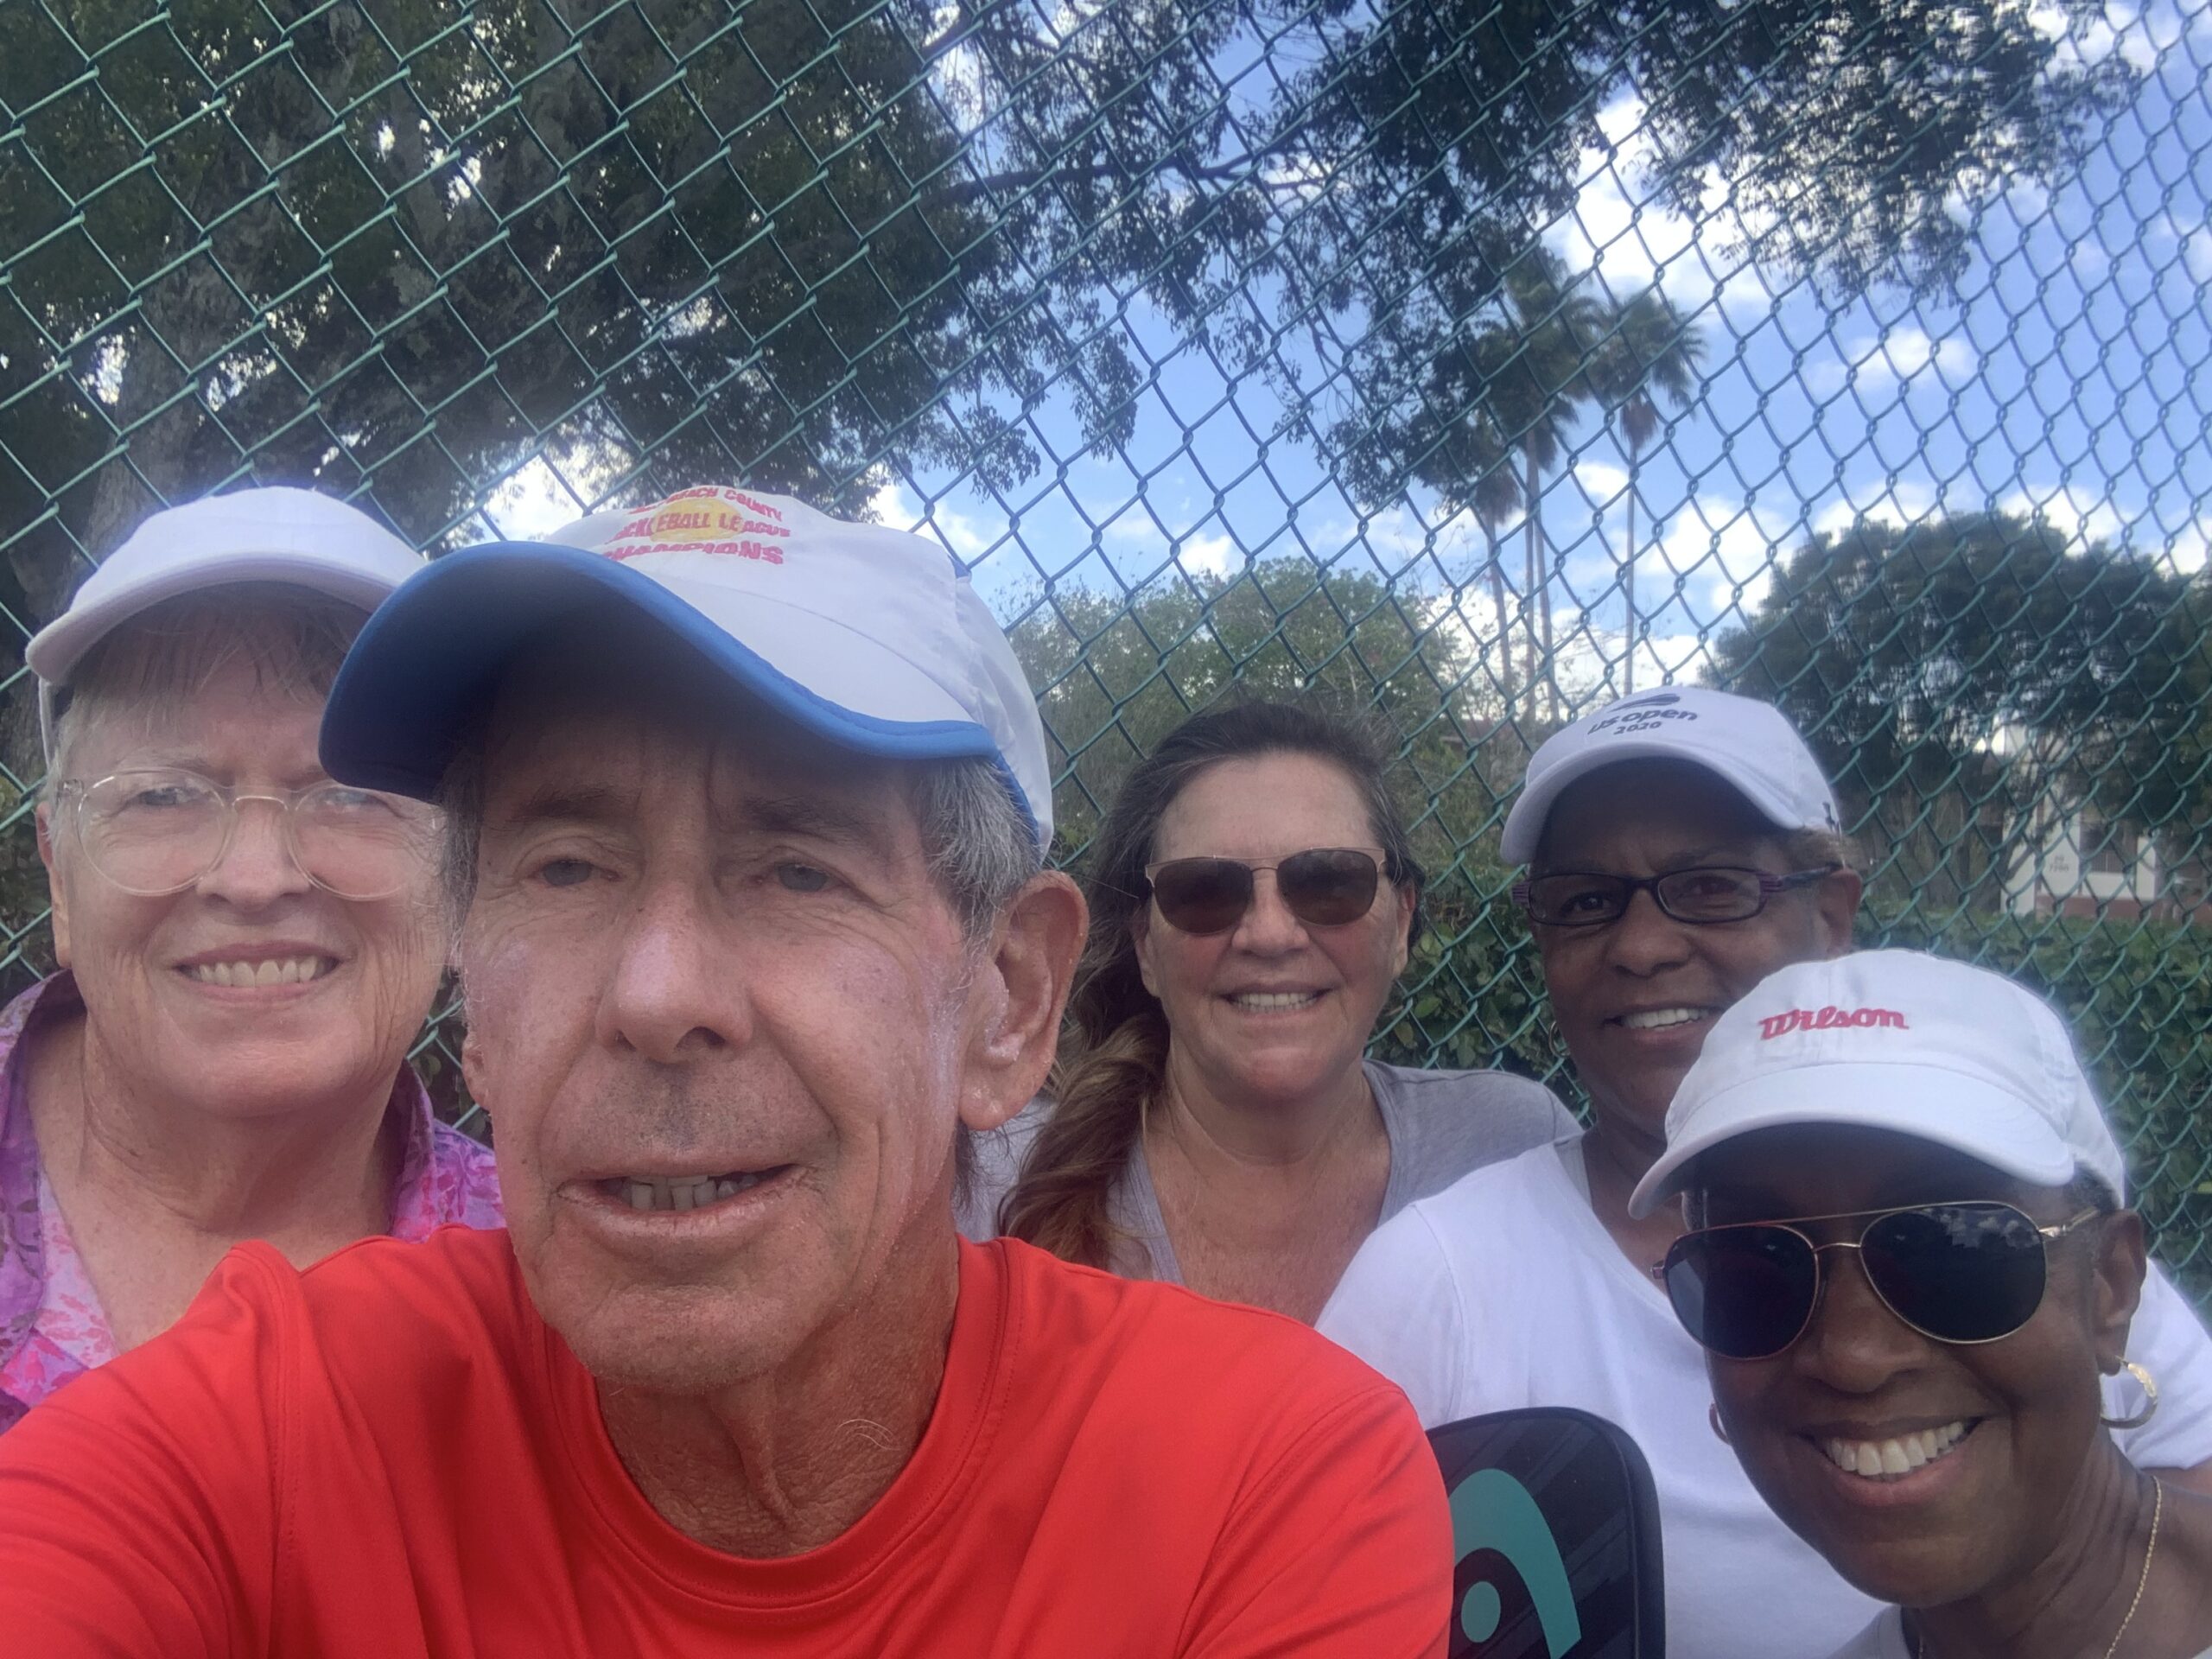 Bob with Yolette, Patricia, Lisa, and Beth after an Advanced Beginners Pickleball clinic in Delray Beach, FL